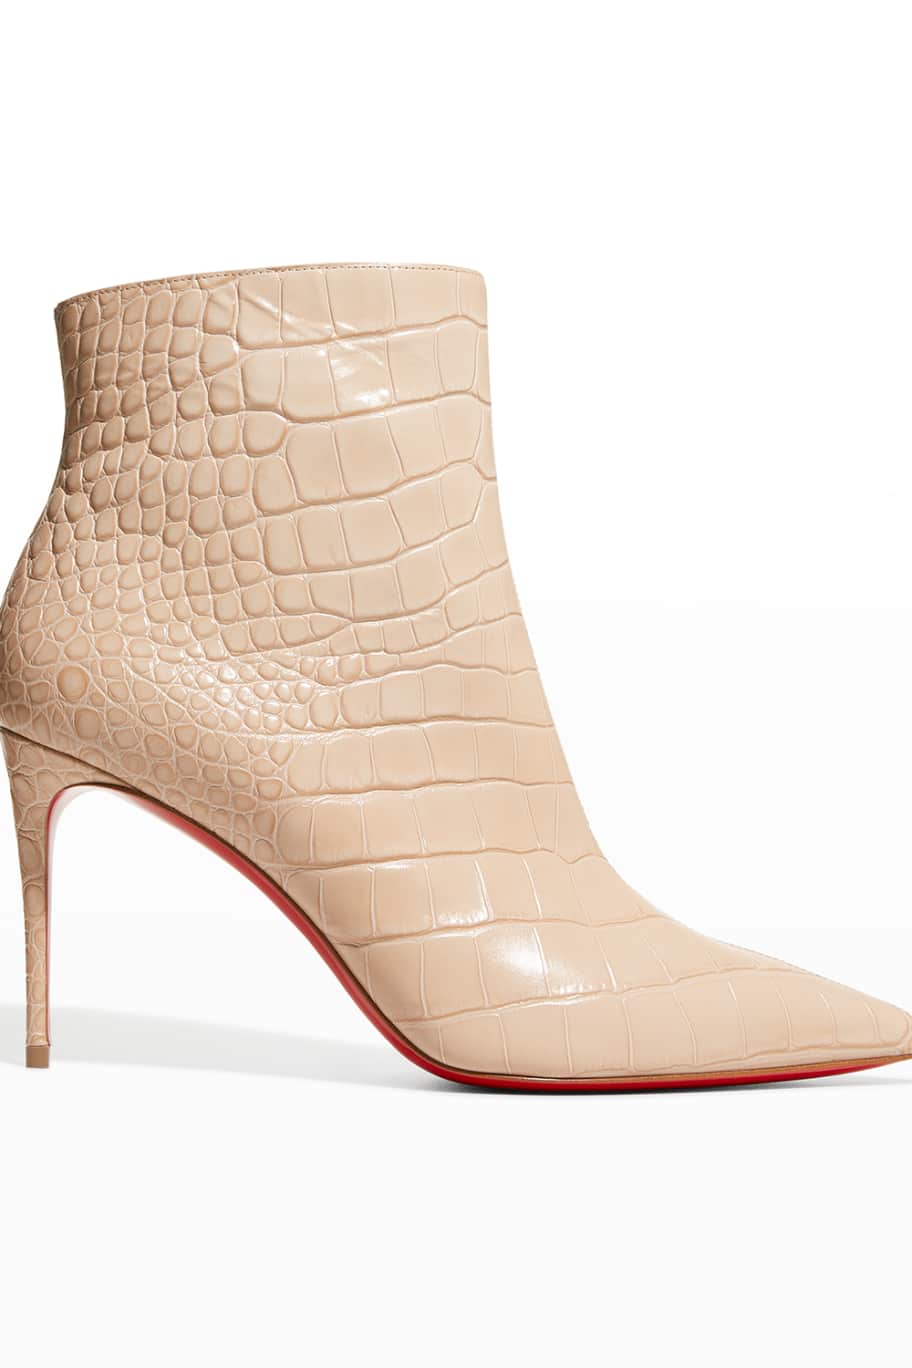 Christian Louboutin So Kate Mock-Croc Red Sole Ankle Booties | Neiman Marcus